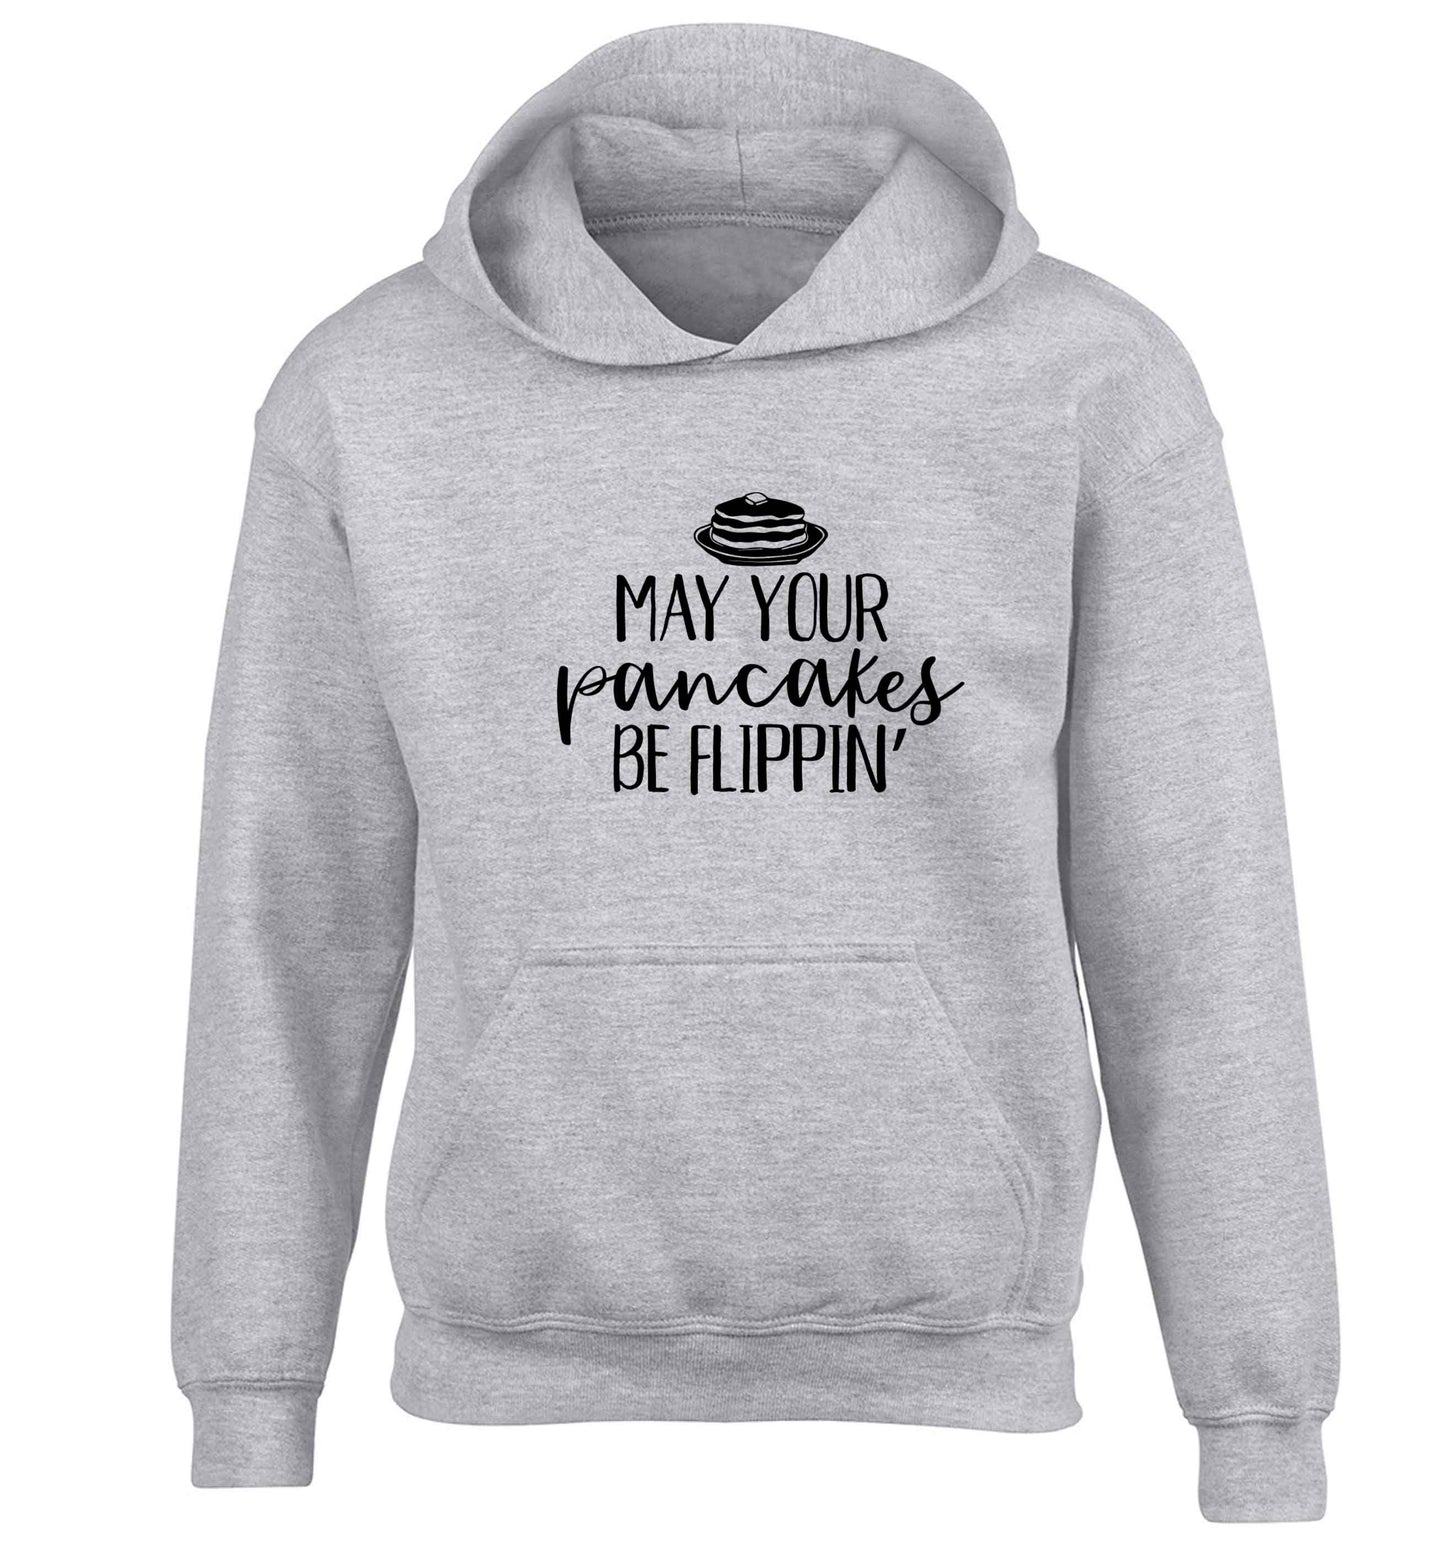 May your pancakes be flippin' children's grey hoodie 12-13 Years